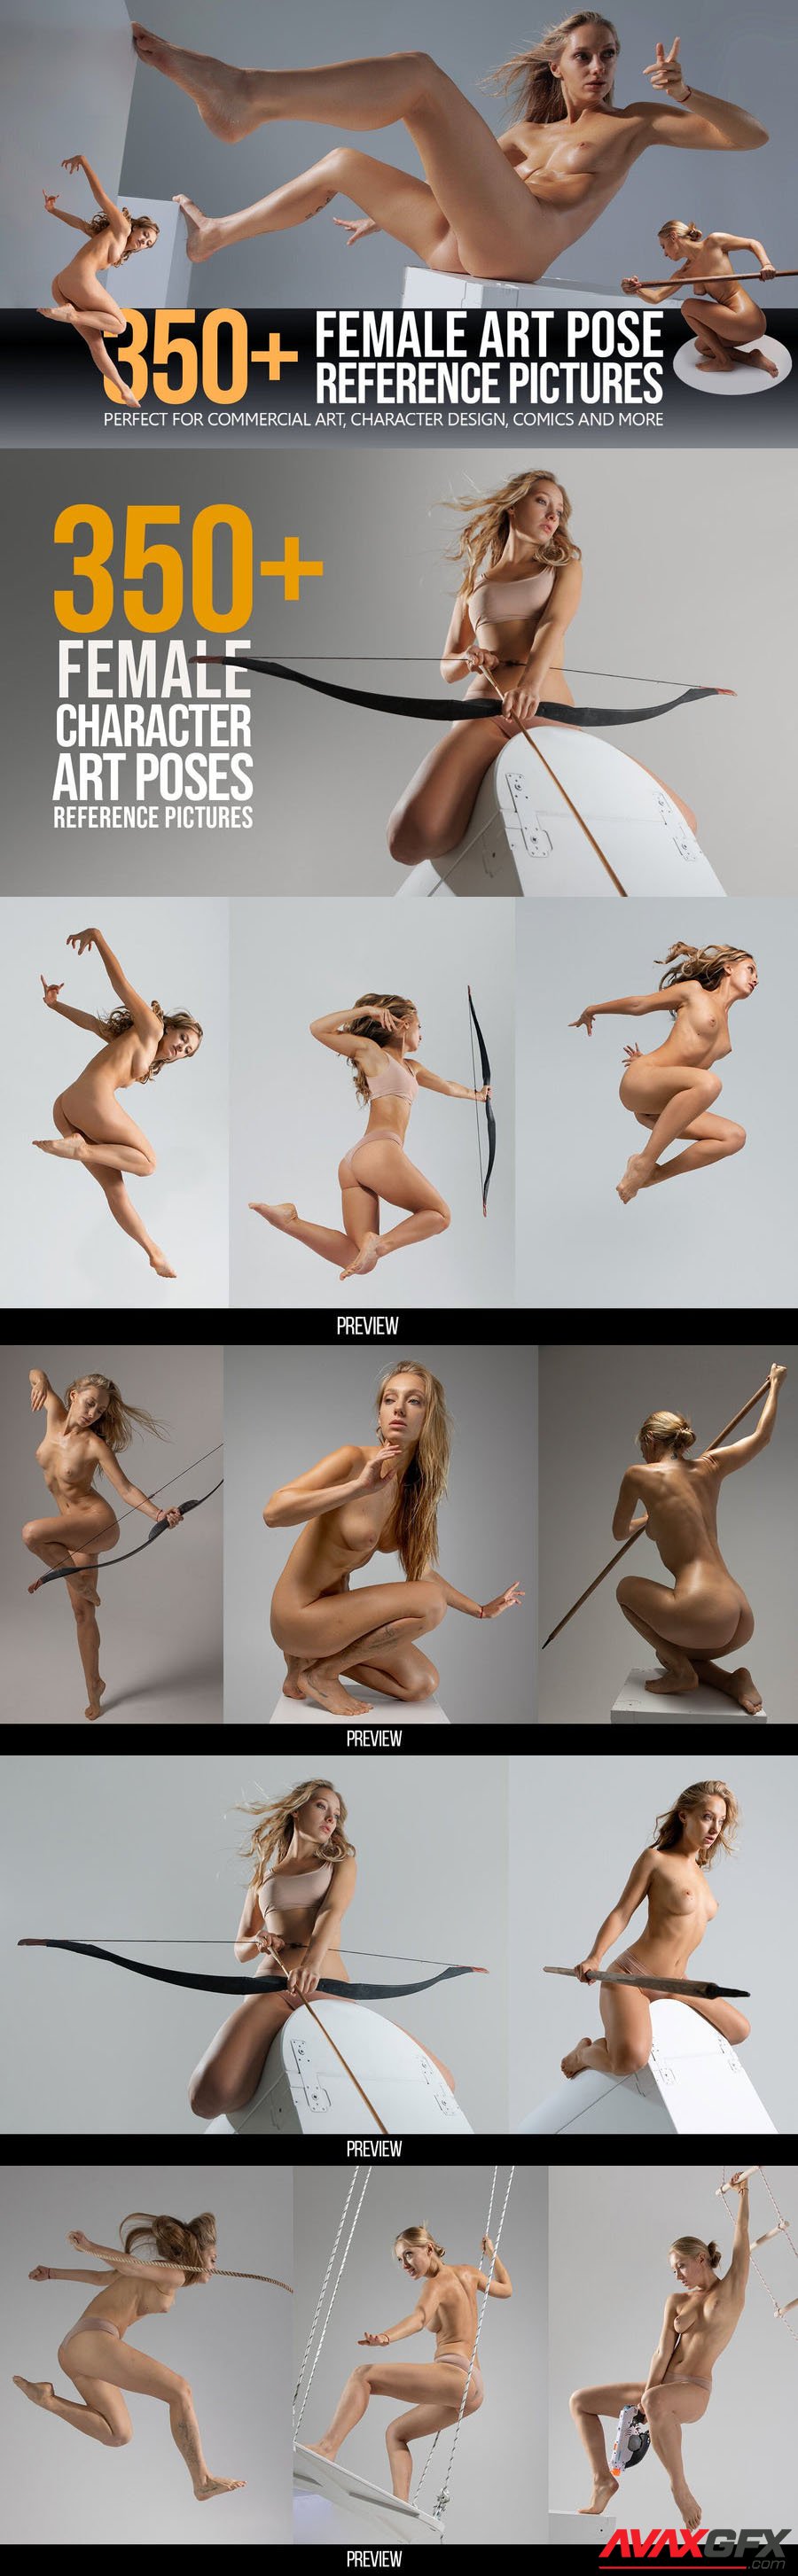 ArtStation 350+ Female Art Pose Reference Pictures